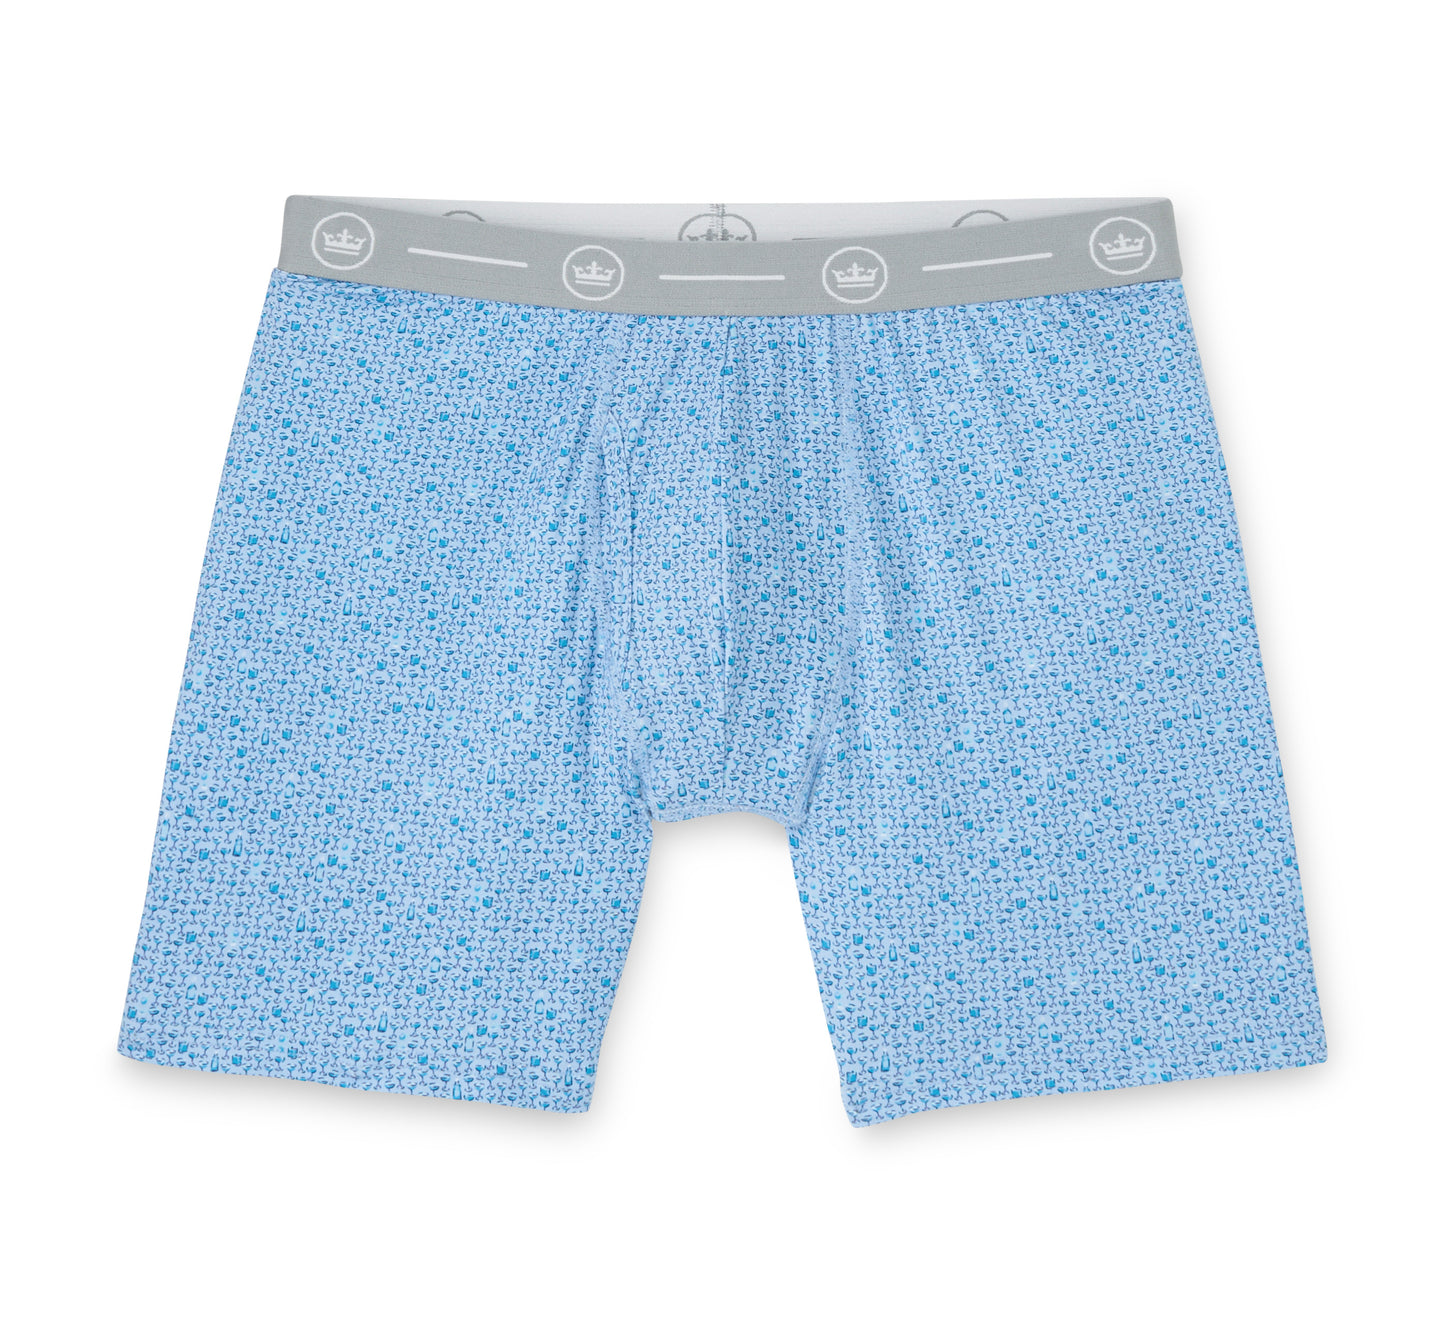 Peter Millar Whiskey Sour Performance Boxer Brief - Cottage Blue